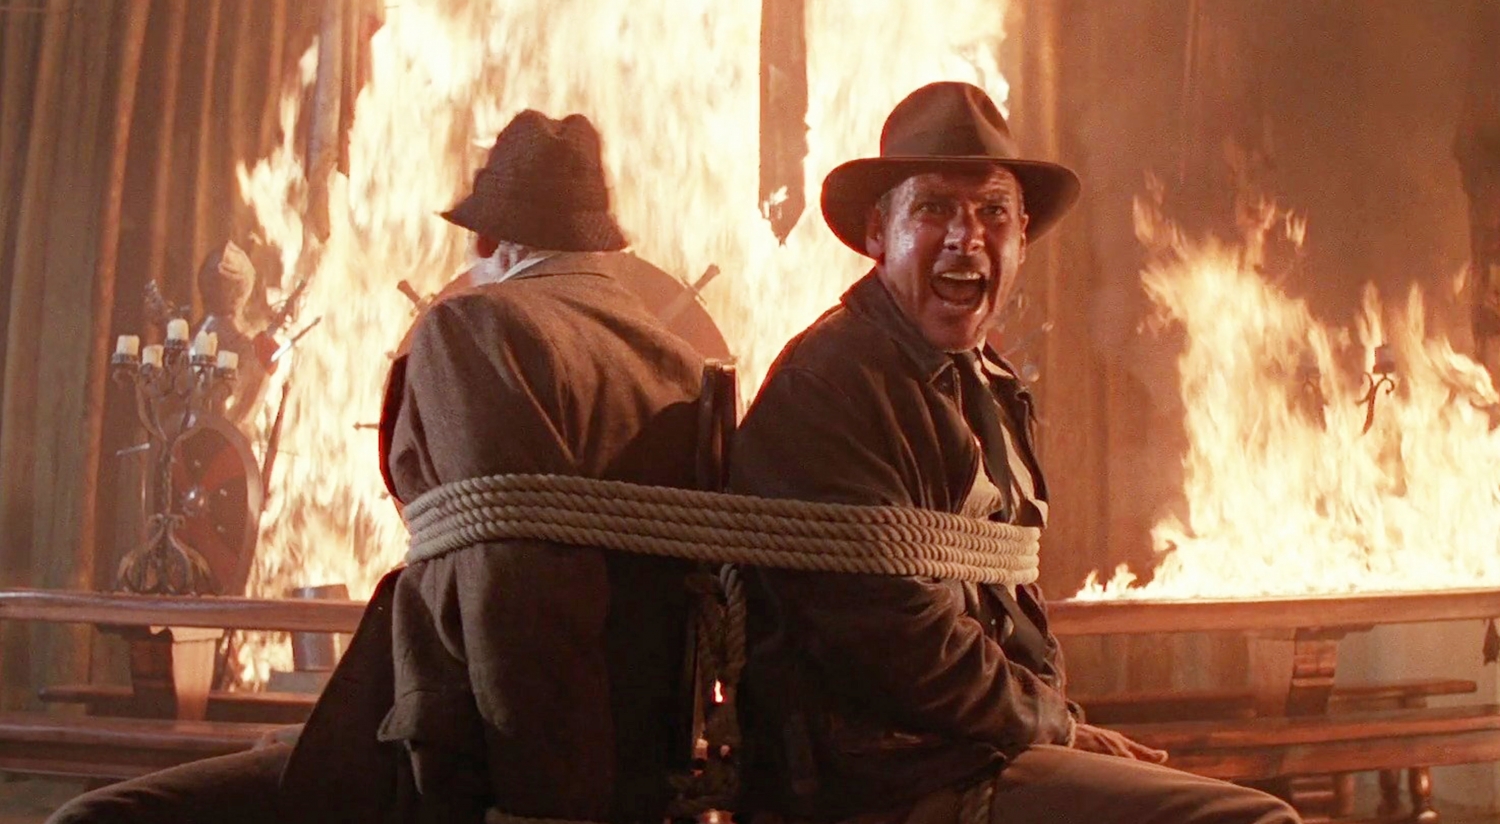 Indiana Jones and the Last Crusade 4K Blu-ray Review